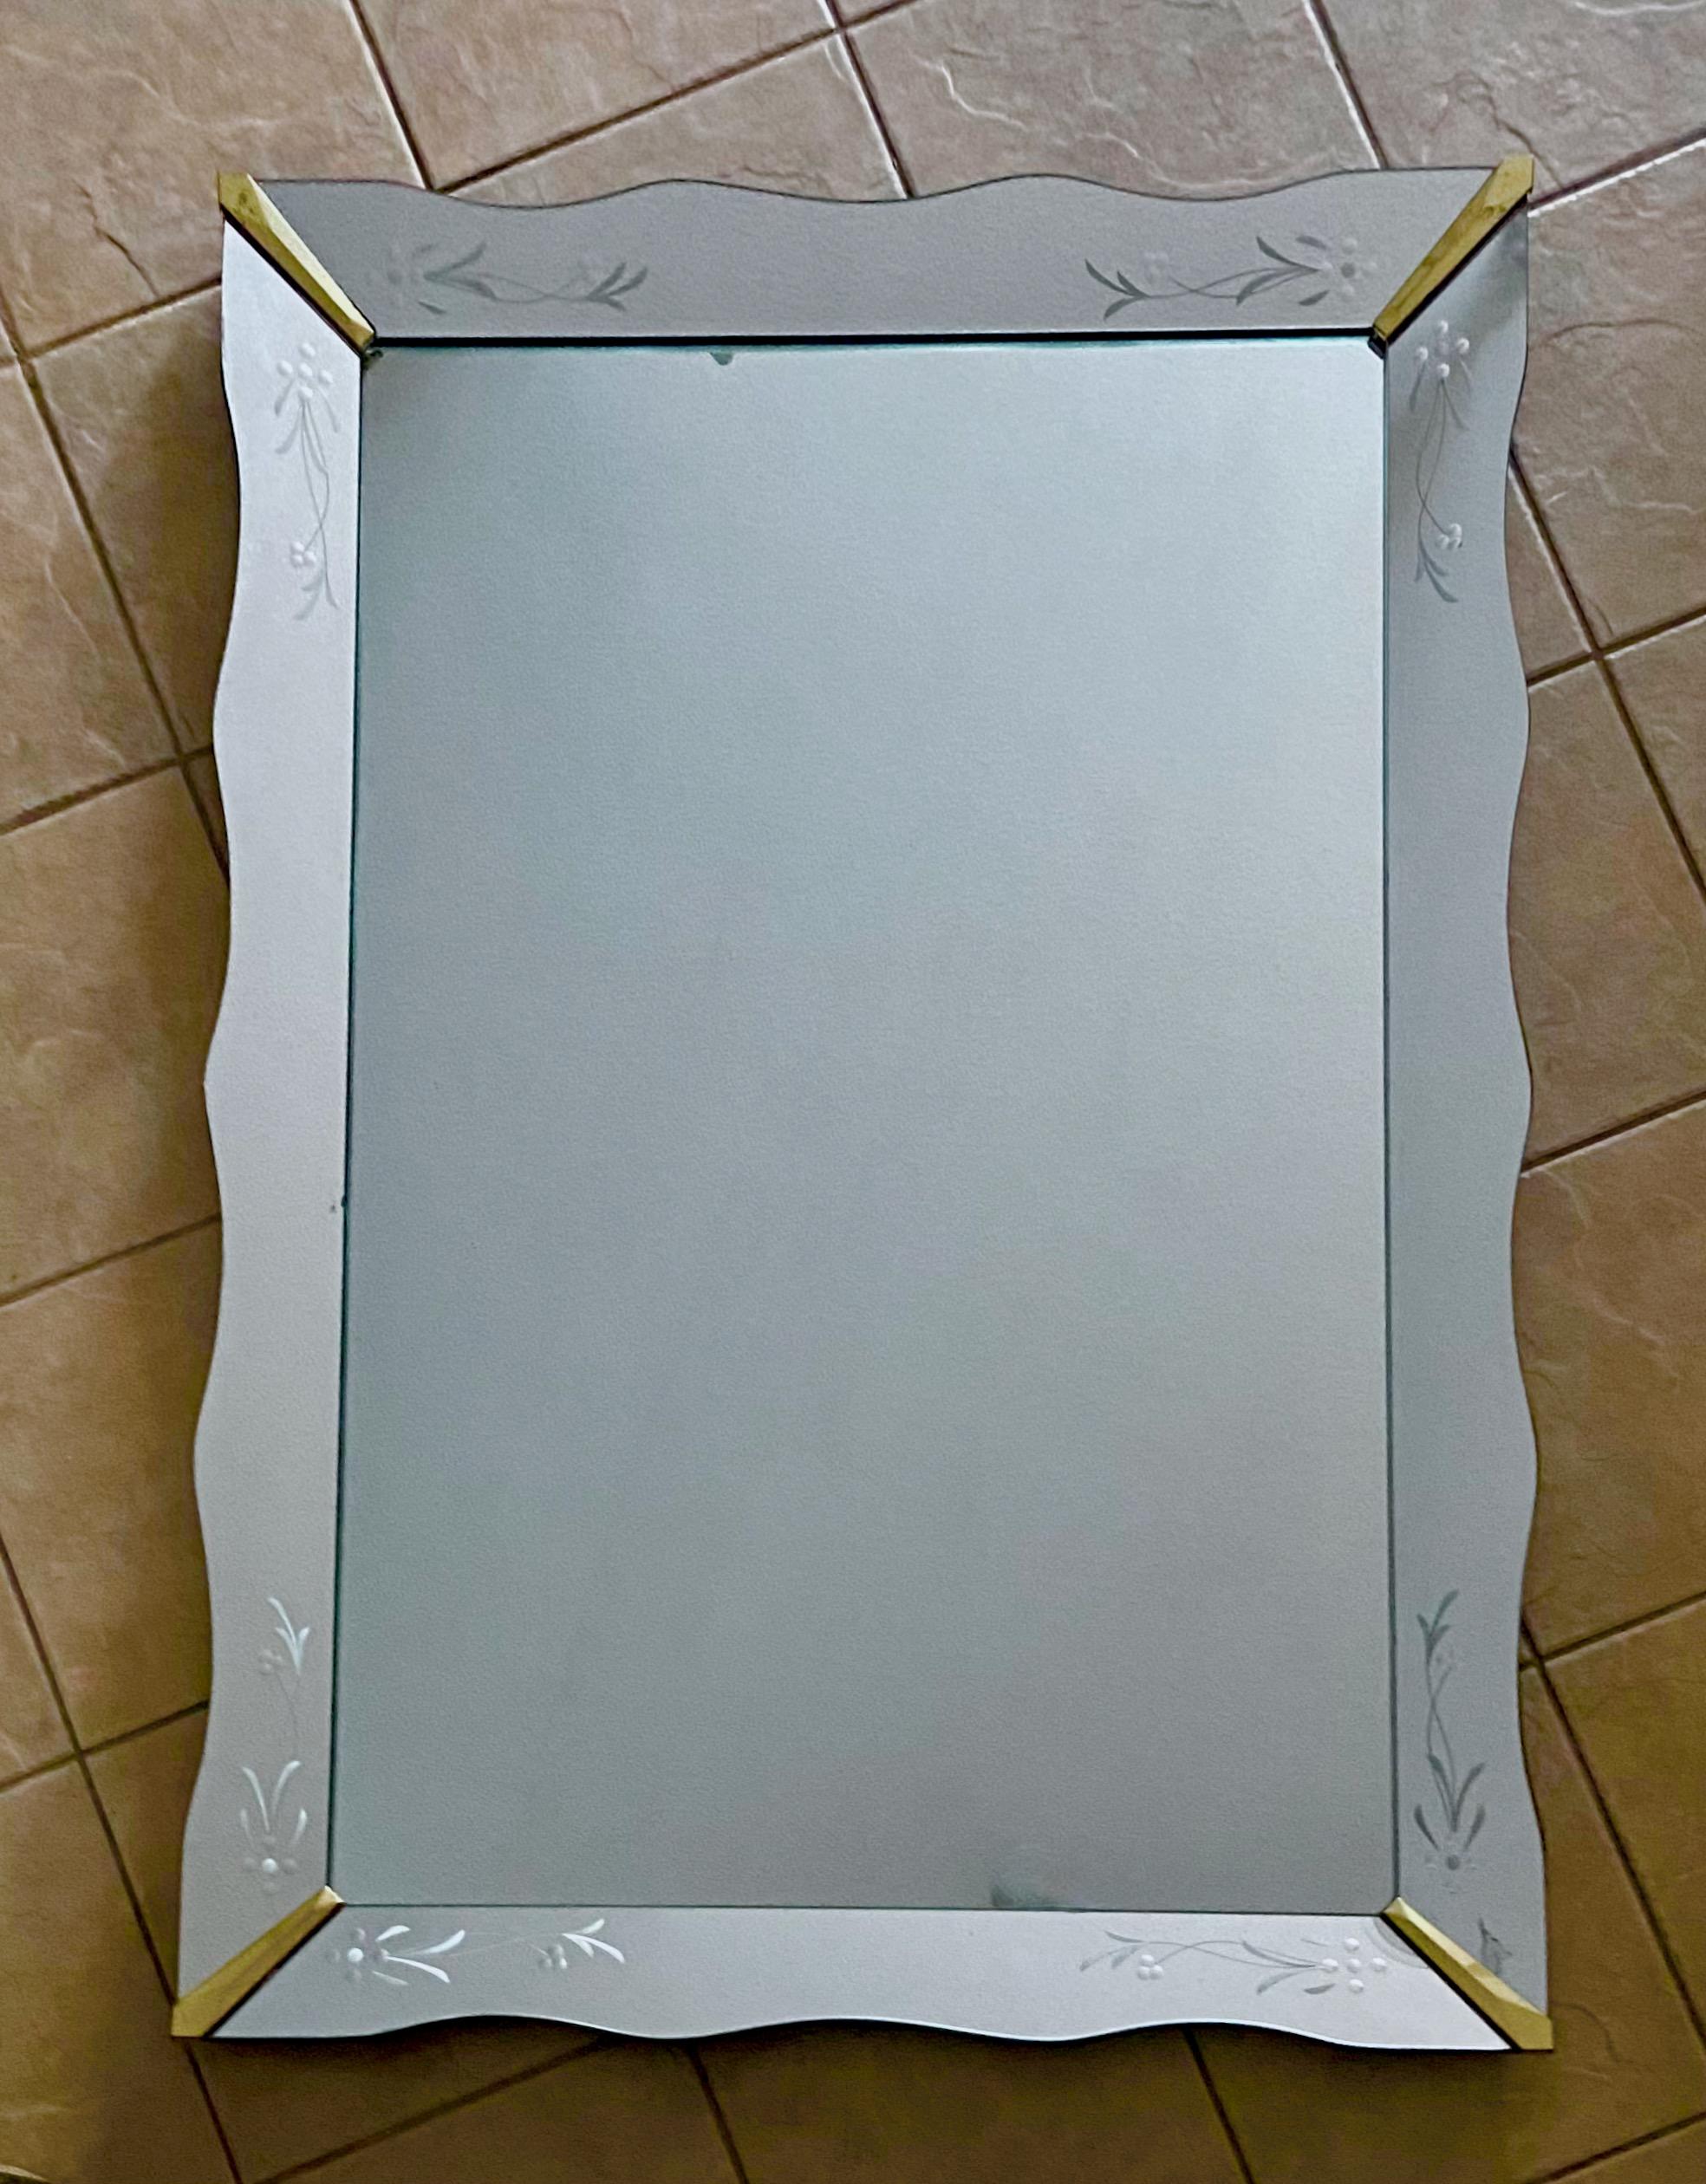 Large rectangular Art Deco Venetian style scalloped or wavy edge wall mirror with brass corners and etched mirrored panels.

Measures: 54